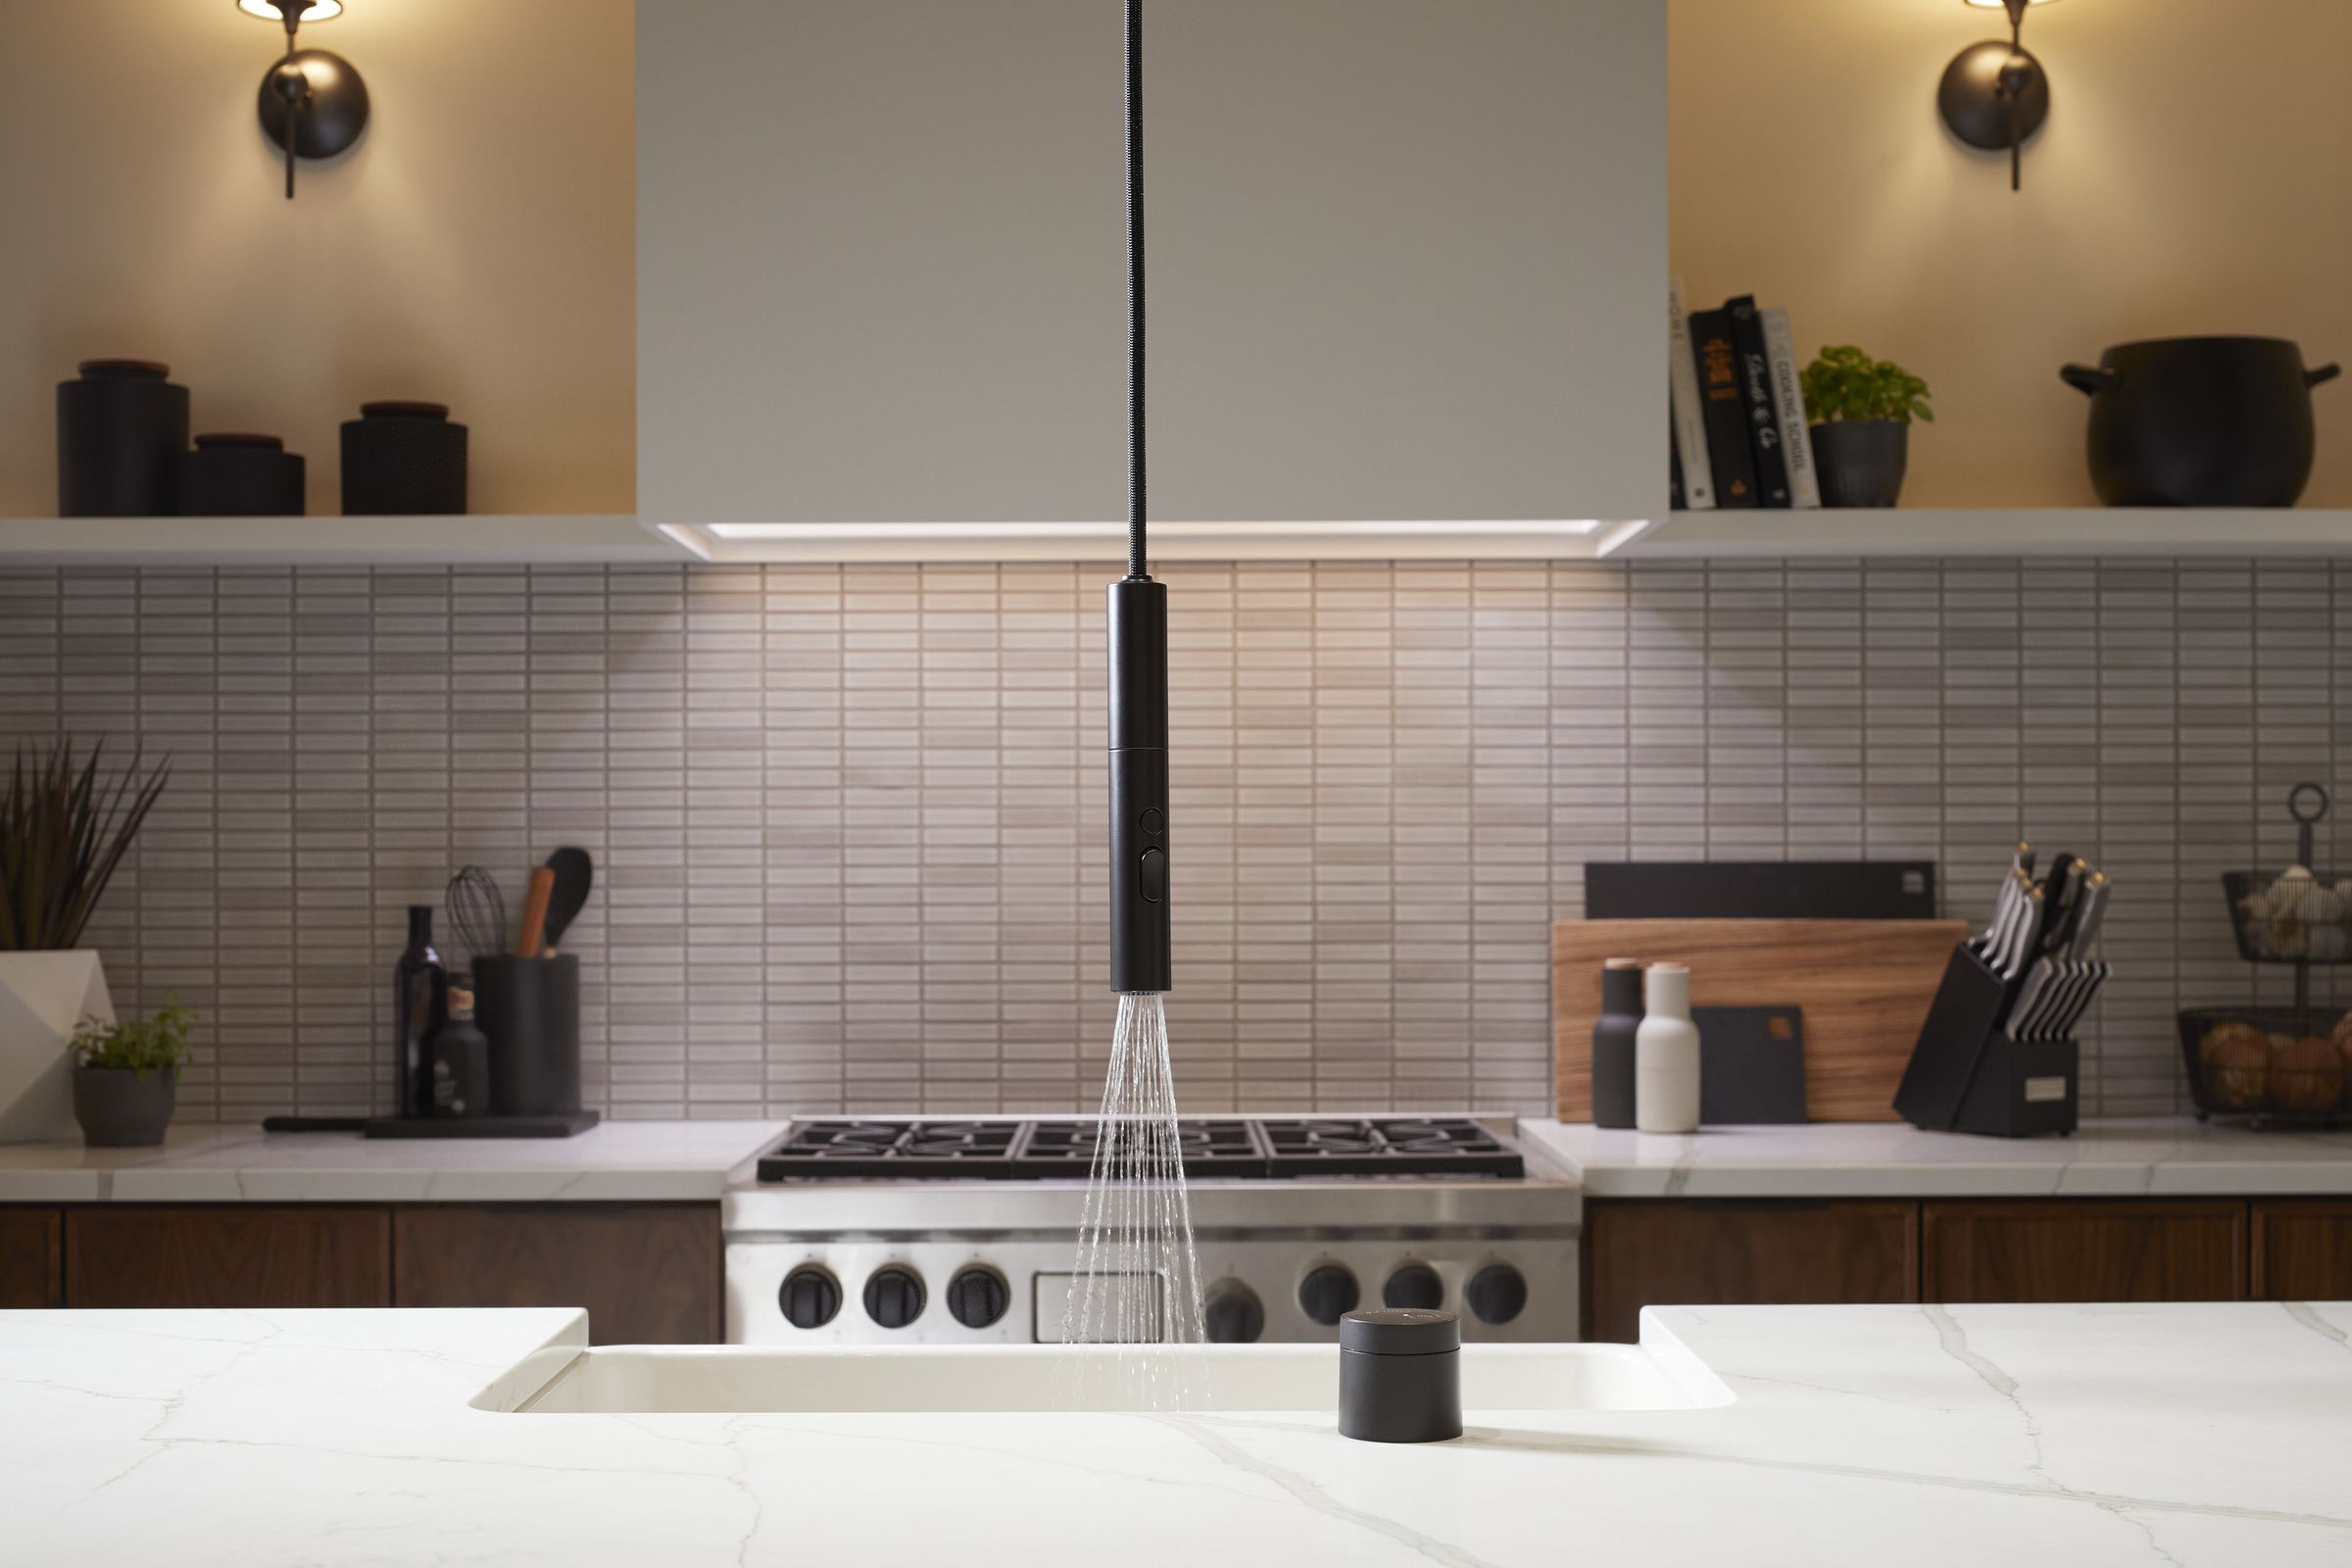 The Kohler Suspend takes kitchen faucets to new heights.